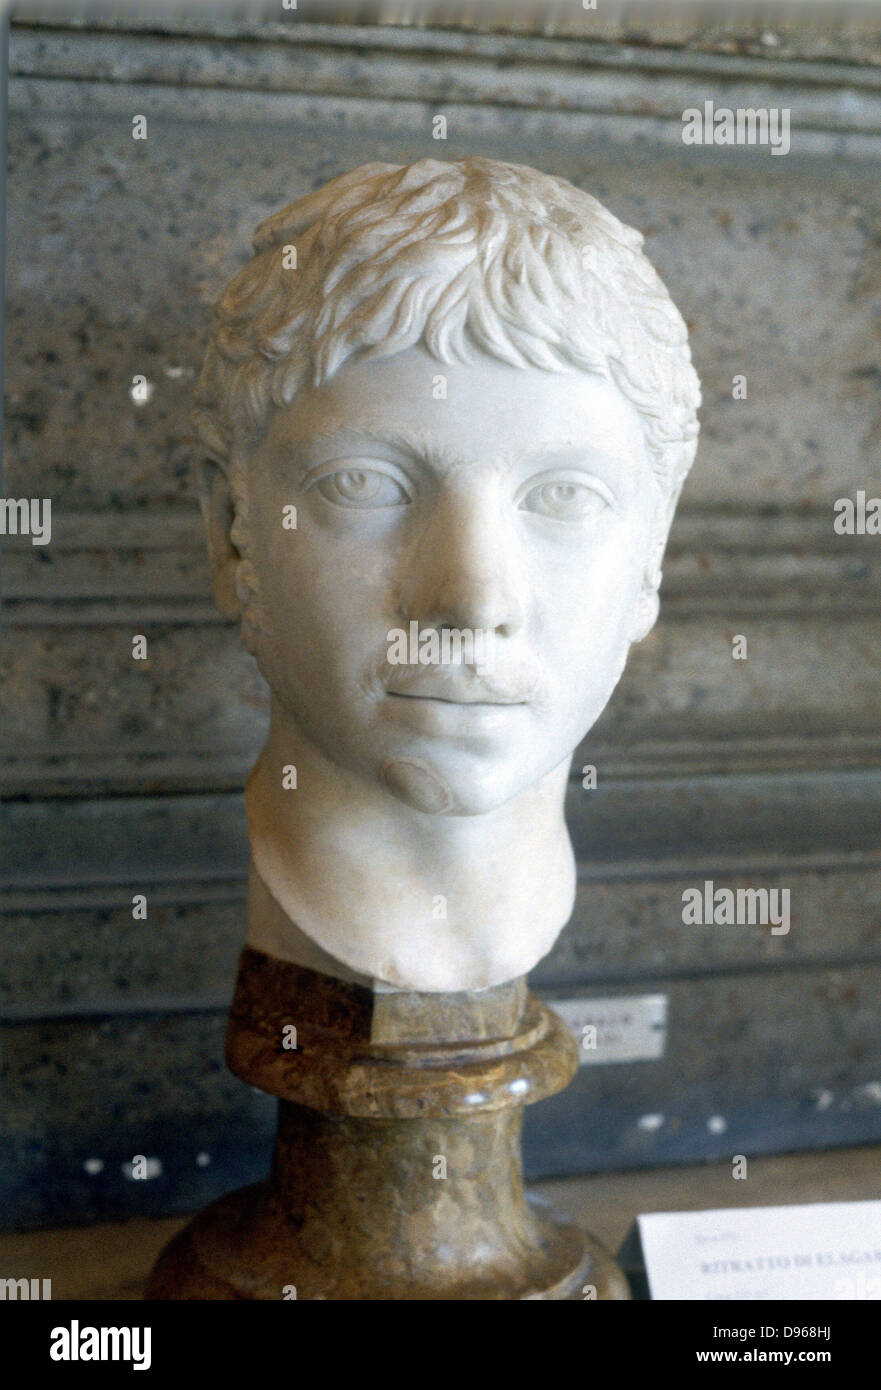 Heliogabalus (204-22) Roman Emperor from 218. Murdered by praetorians in palace revolution. Marble bust. Stock Photo